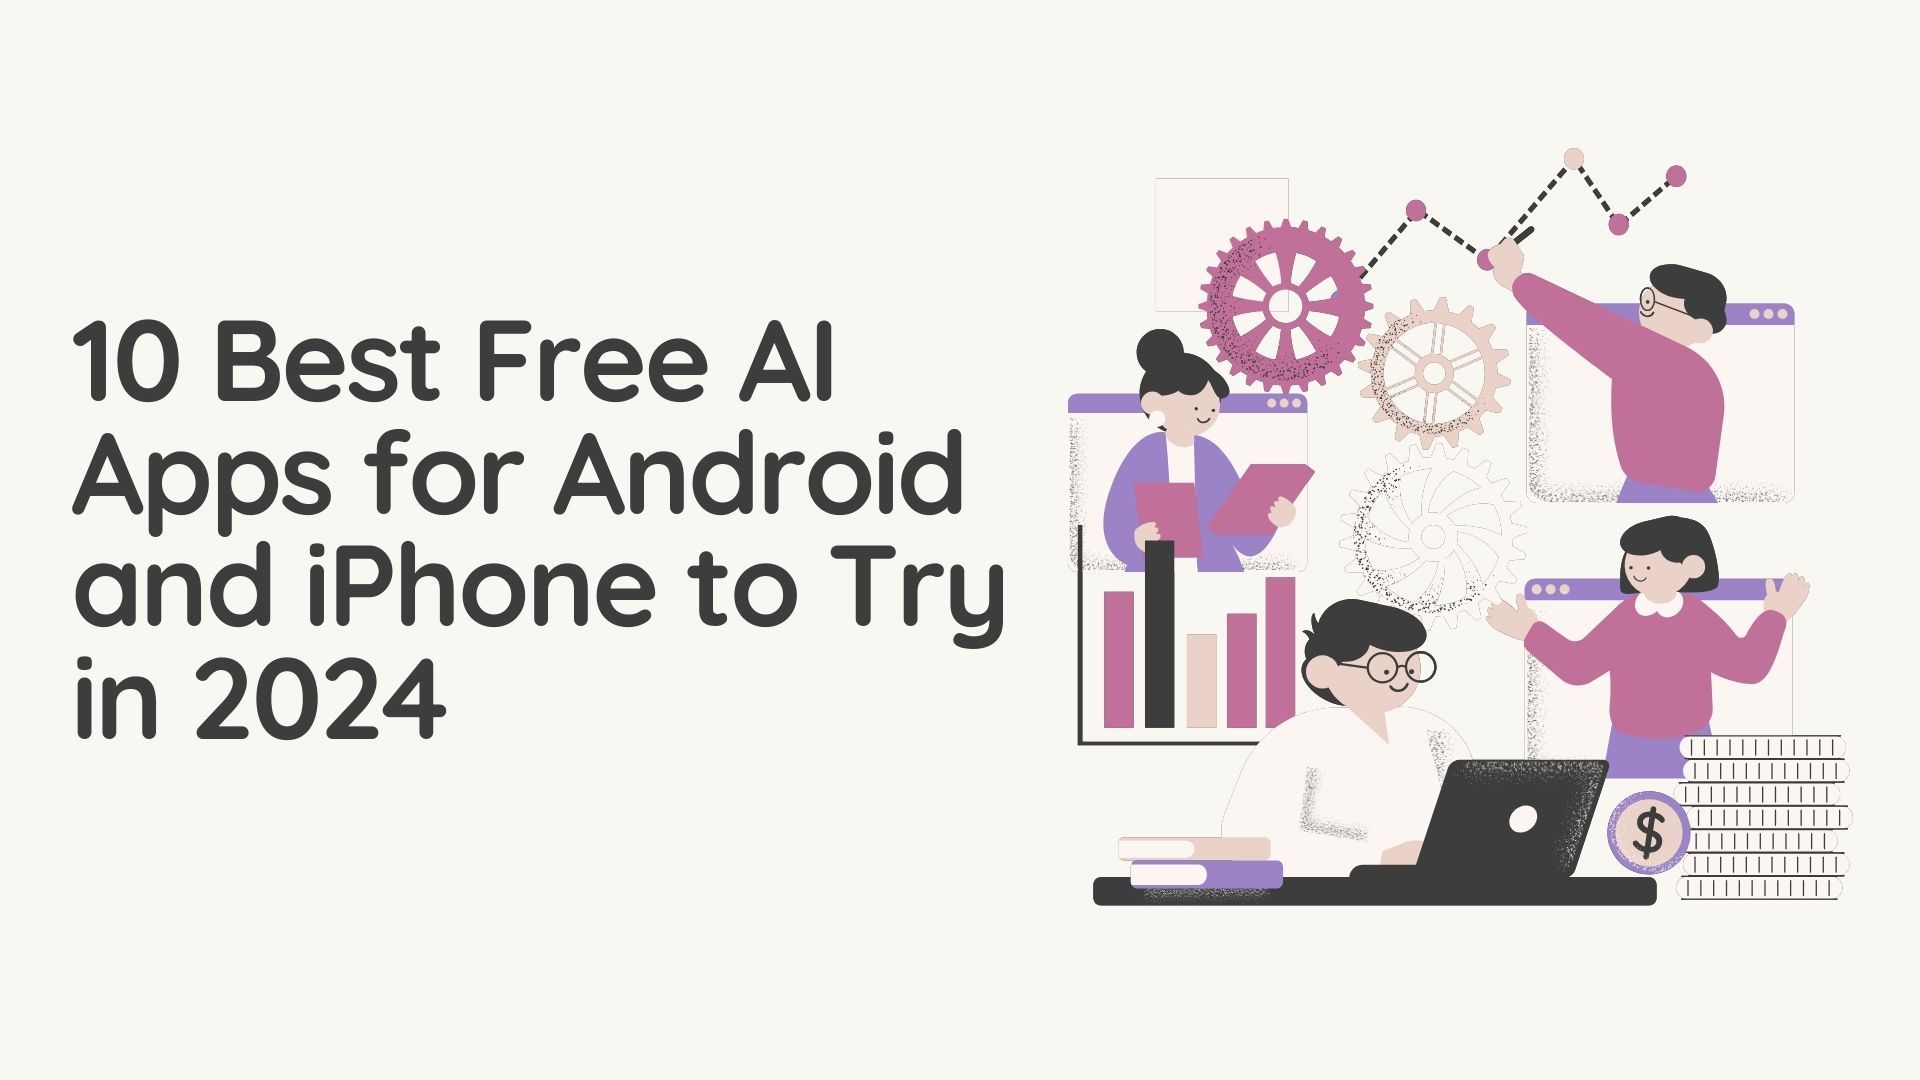 10 Best Free AI Apps for Android and iPhone to Try in 2024